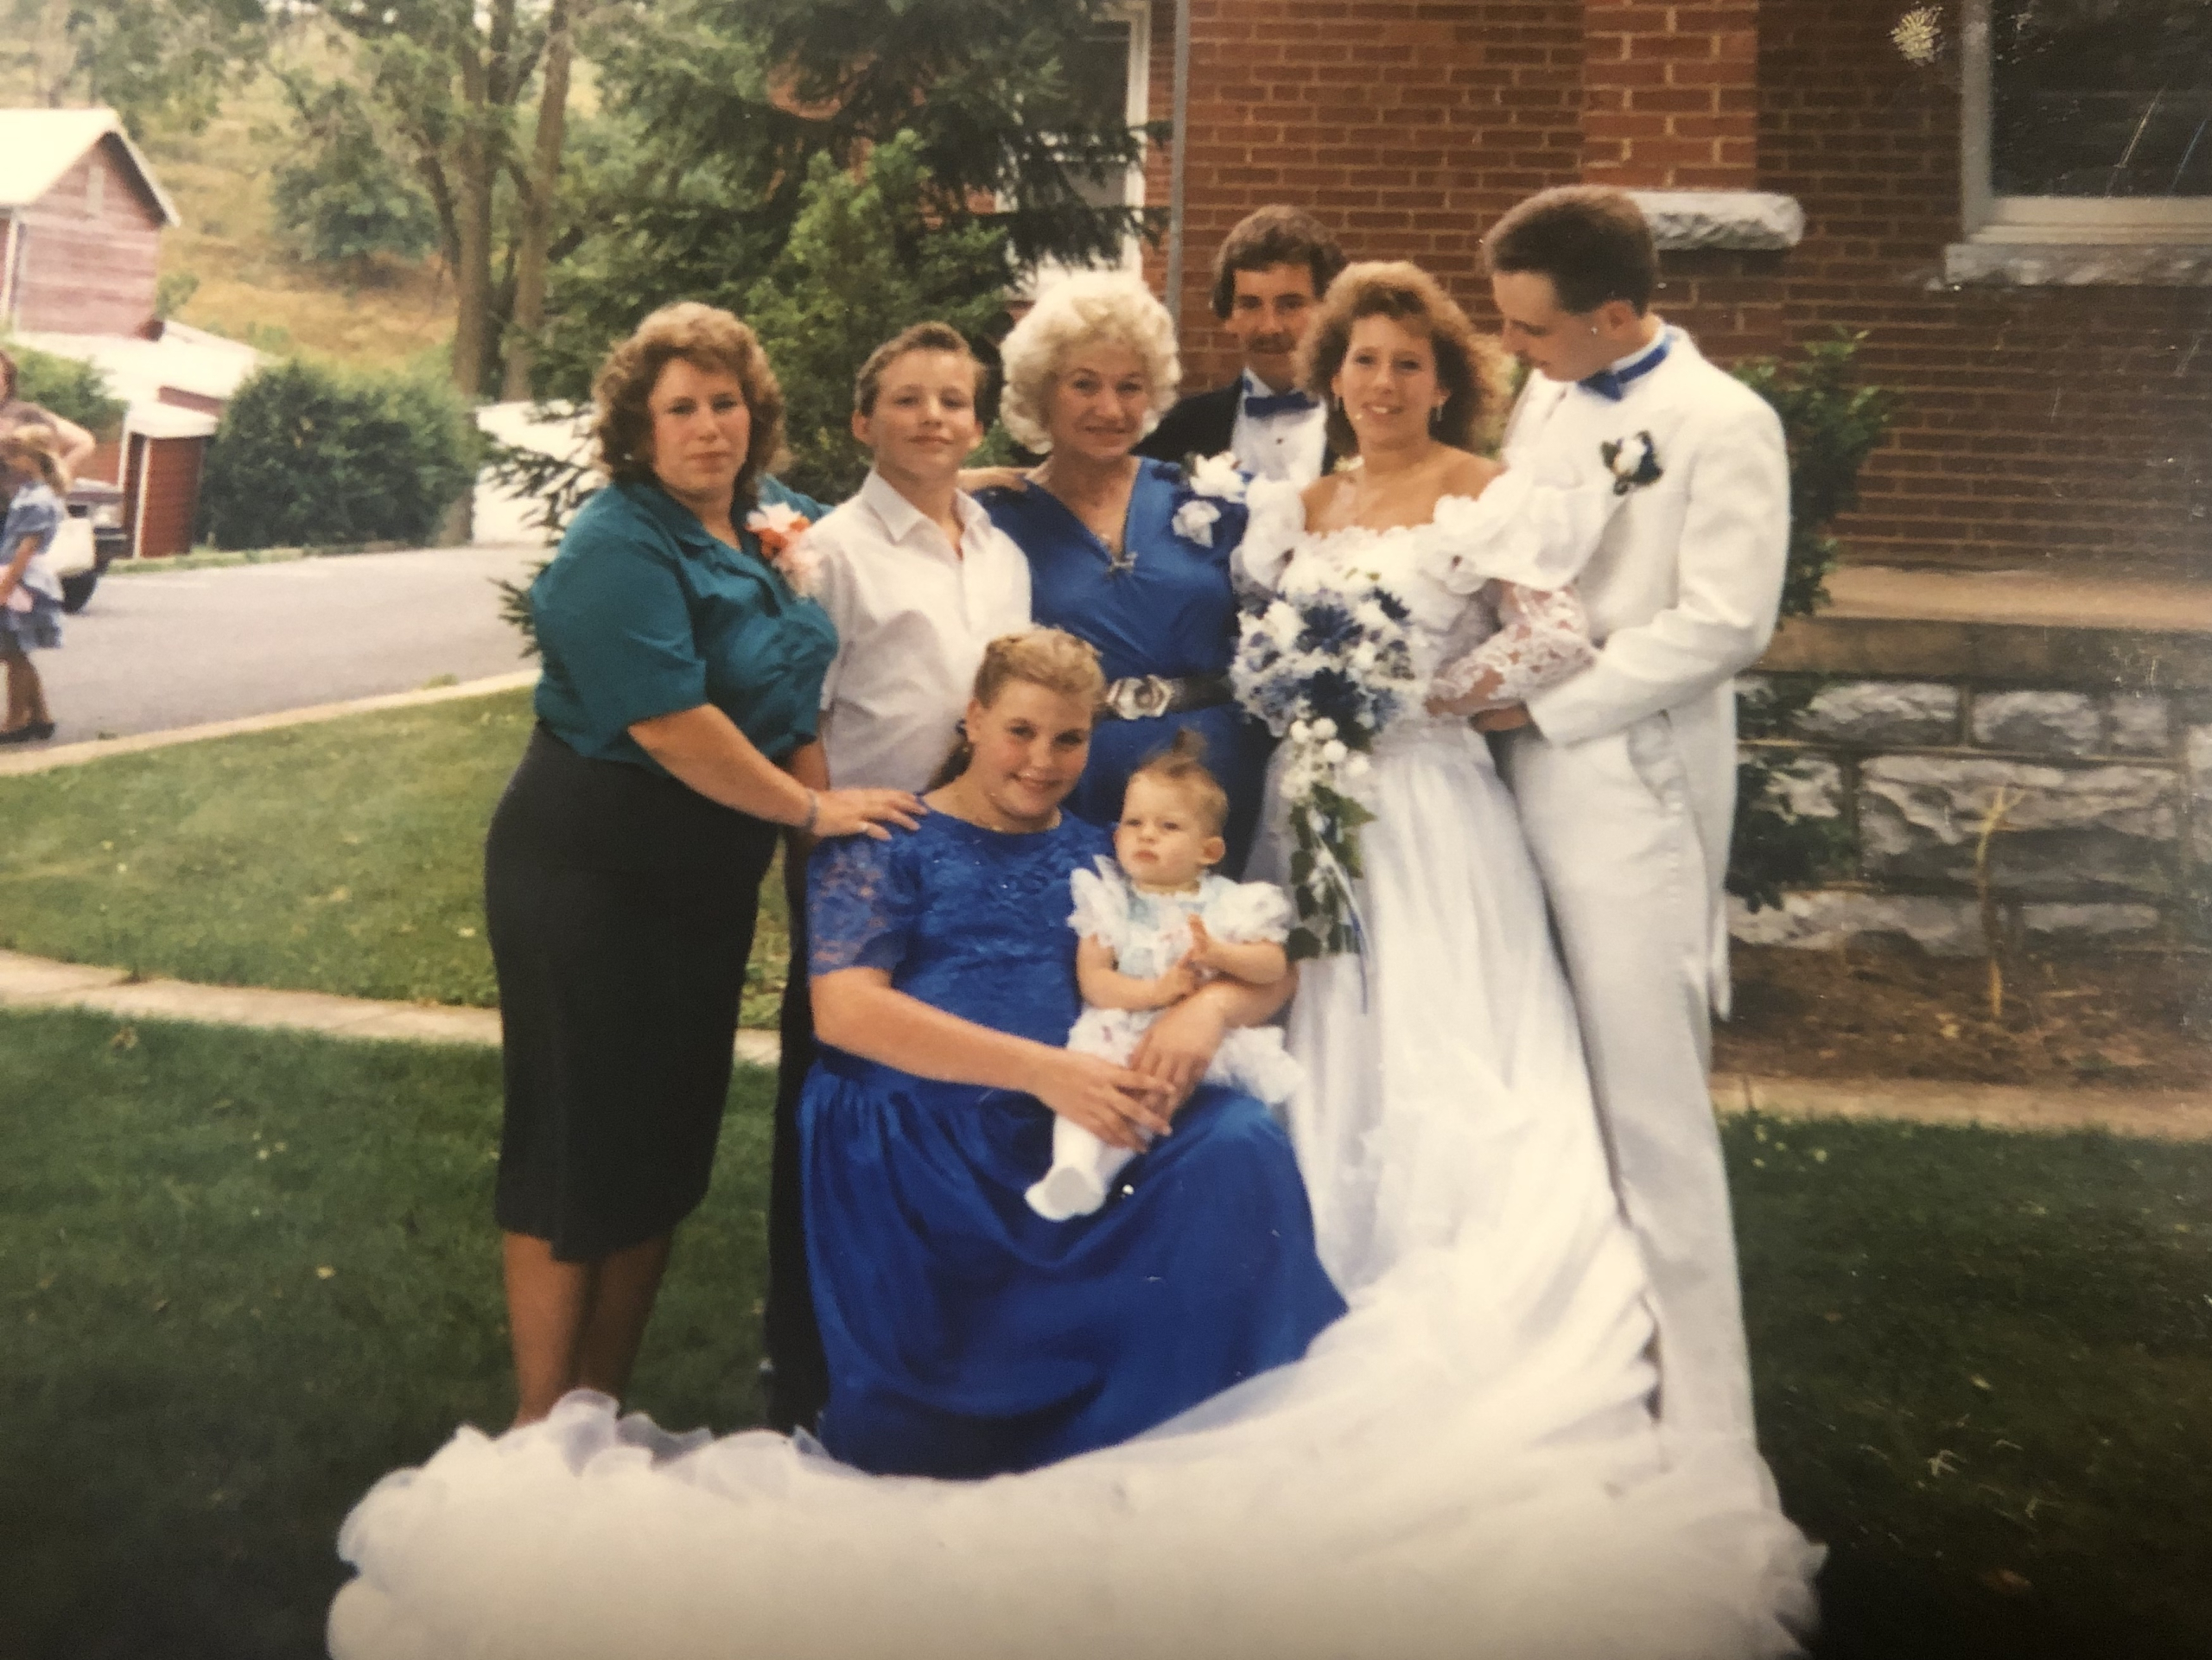 Share Your Mom Pics and Win!